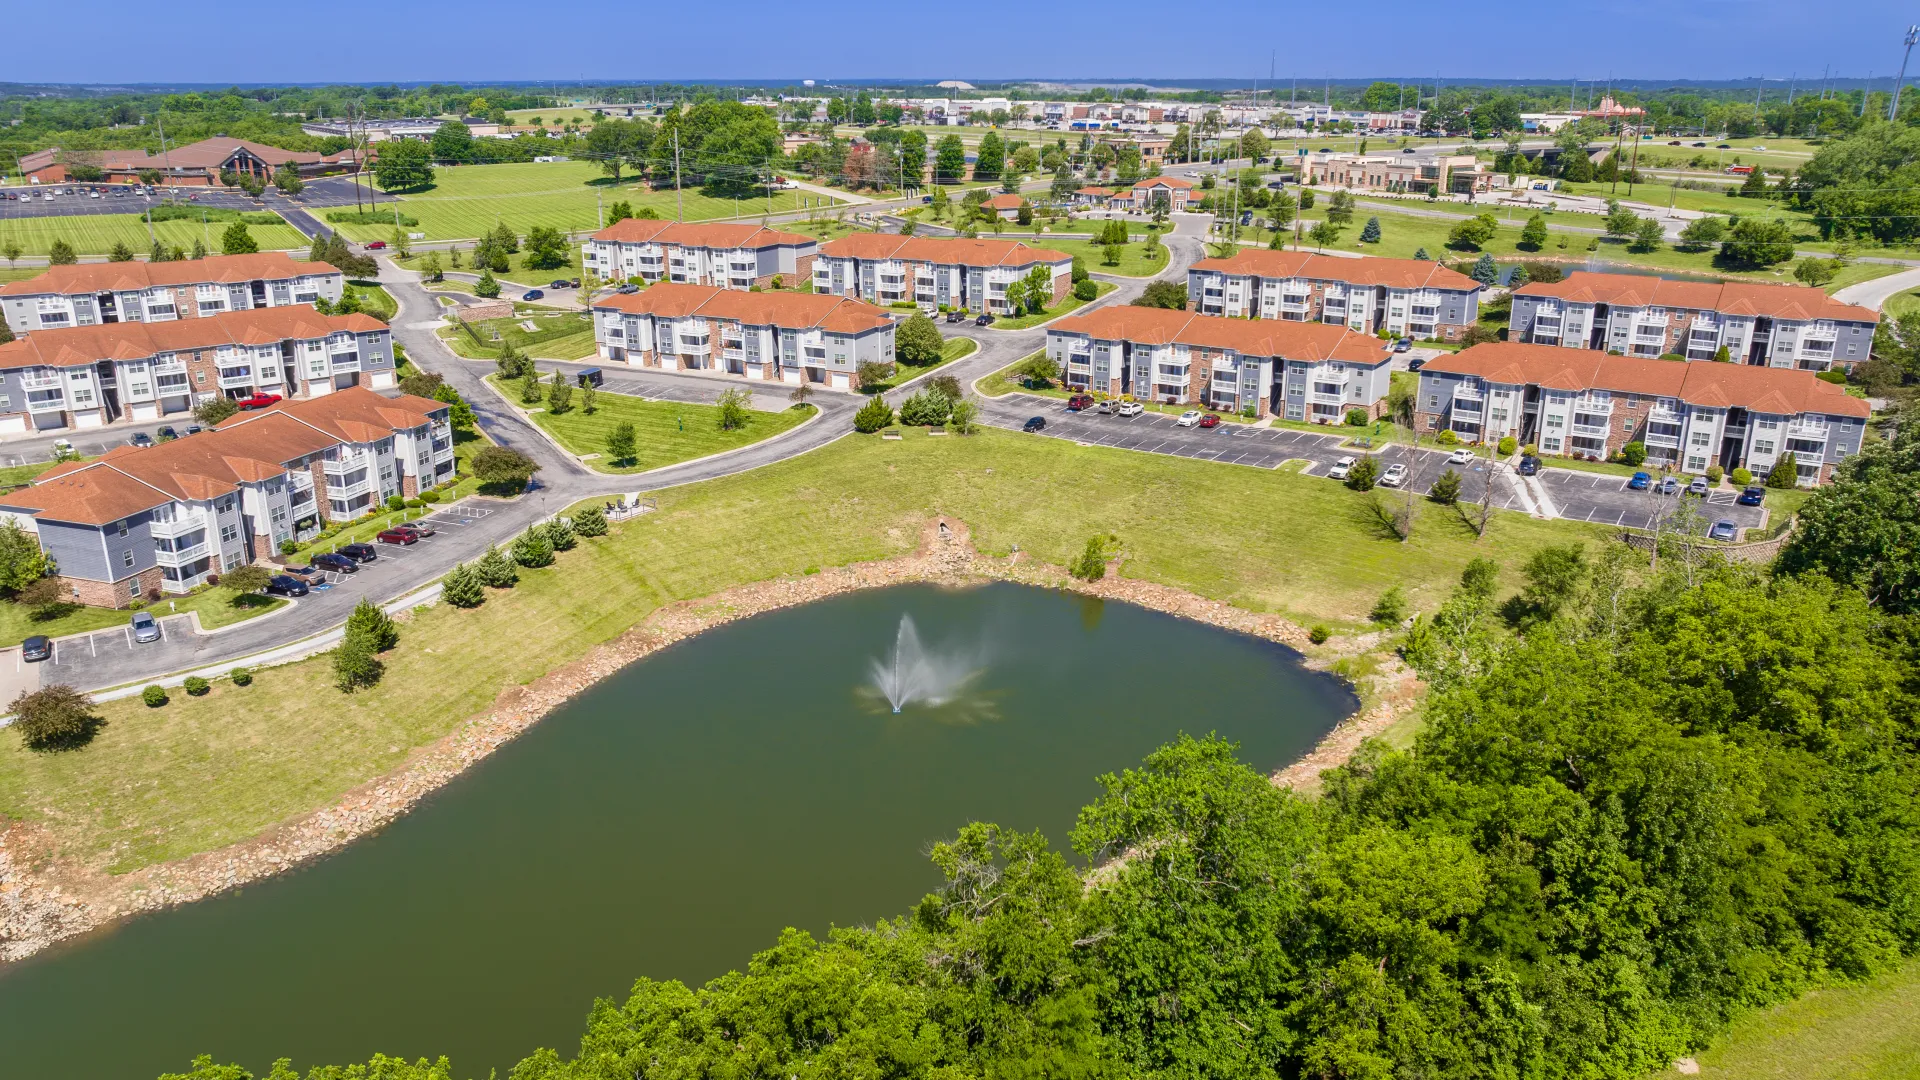 Aerial view of Lenox West showing multiple residential buildings, a central pond with a fountain, and surrounding greenery.